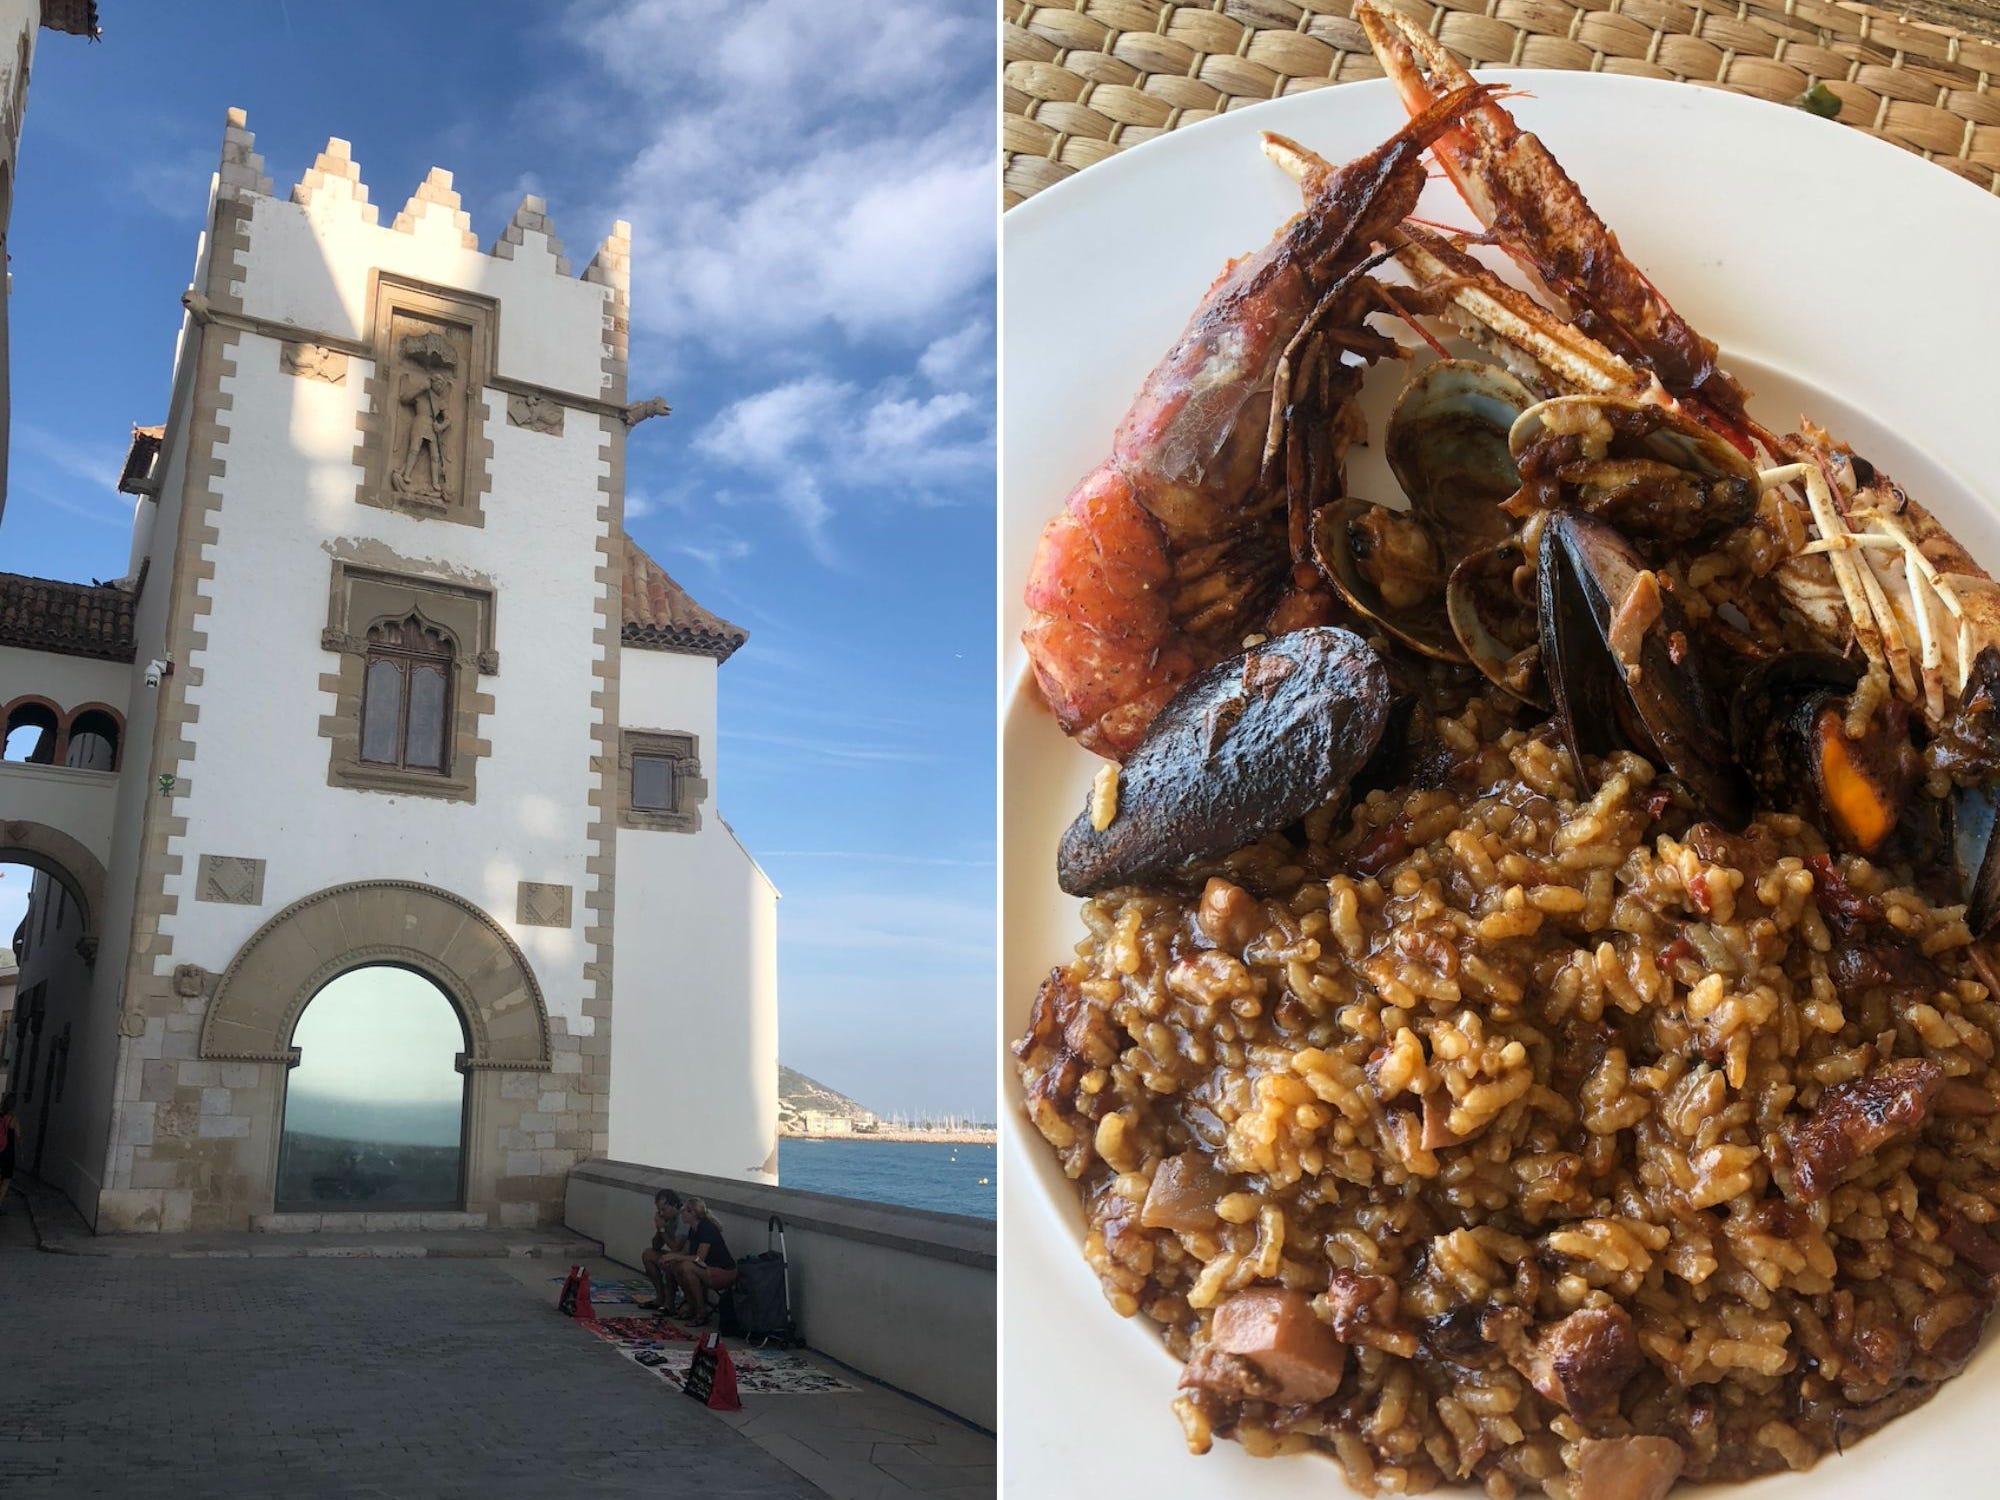 <p>This coastal city in Spain is known for its fresh seafood, queer-friendly beaches, and <a href="https://www.cntraveler.com/activities/museus-de-sitges" rel="noopener nofollow sponsored">art history</a>. It's smaller than Barcelona, which is approximately a 40-minute drive away, so it might make for a more relaxed trip than if you visited a big city.</p><p>For about $369, according to <a href="https://affiliate.insider.com?h=c104ffa46b5956238e5071eb3f51f3f91d30c737cef8f4b2ef658f0be55e84e9&platform=msn_reviews&postID=642ade21ba755654617ced15&site=in&u=https%3A%2F%2Fwww.booking.com%2Fhotel%2Fes%2Fmelia-sitges.html%3Faid%3D356980%26label%3Dgog235jc-1DCAsoRkIMbWVsaWEtc2l0Z2VzSDNYA2inAogBAZgBMbgBB8gBDNgBA-gBAfgBAogCAagCA7gChvPhoQbAAgHSAiQ3NDc3ZjJiOS0zMjY4LTQ1NzgtOGNkOC1iZmJjY2Q5NzM1ZTXYAgTgAgE%26sid%3Dd4a030a9a8b25c7b2a1a6daaf40b1db6%26sb%3D1%26src%3Dhotel%26src_elem%3Dsb%26error_url%3Dhttps%253A%252F%252Fwww.booking.com%252Fhotel%252Fes%252Fmelia-sitges.html%253Faid%253D356980%2526label%253Dgog235jc-1DCAsoRkIMbWVsaWEtc2l0Z2VzSDNYA2inAogBAZgBMbgBB8gBDNgBA-gBAfgBAogCAagCA7gChvPhoQbAAgHSAiQ3NDc3ZjJiOS0zMjY4LTQ1NzgtOGNkOC1iZmJjY2Q5NzM1ZTXYAgTgAgE%2526sid%253Dd4a030a9a8b25c7b2a1a6daaf40b1db6%2526checkin_month%253D5%253Bcheckin_monthday%253D11%253Bcheckin_year%253D2023%253Bcheckout_month%253D5%253Bcheckout_monthday%253D14%253Bcheckout_year%253D2023%253Bdist%253D0%253Bdo_availability_check%253D1%253Bgroup_adults%253D1%253Bgroup_children%253D0%253Bhp_avform%253D1%253Bhp_group_set%253D0%253Bno_rooms%253D1%253Broom1%253DA%253Bsb_price_type%253Dtotal%253Bsrc%253Dhotel%253Bstay_on_hp%253D1%253Btype%253Dtotal%2526%2526%26highlighted_hotels%3D91472%26origin%3Dhp%26hp_avform%3D1%26do_availability_check%3Don%26stay_on_hp%3D1%26checkin_year%3D2023%26checkin_month%3D5%26checkin_monthday%3D11%26checkout_year%3D2023%26checkout_month%3D5%26checkout_monthday%3D13%26group_adults%3D1%26group_children%3D0%26no_rooms%3D1%26b_h4u_keep_filters%3D%26from_sf%3D1%23availability_target&utm_source=msn_reviews" rel="nofollow noopener sponsored">Booking.com</a>, you can get two nights at <a href="https://www.melia.com/en/hotels/spain/sitges/melia-sitges" rel="noopener nofollow sponsored nofollow sponsored">Meliá Sitges</a>, a boutique, resort-style hotel with an outdoor pool and complimentary breakfast buffet. The property is within walking distance of <a href="https://affiliate.insider.com?h=ff7c0a90814b96f385afe4ed253fb9a73b07524e3513b640b3dbb1ec6d0fdc79&platform=msn_reviews&postID=642ade21ba755654617ced15&site=in&u=https%3A%2F%2Fwww.tripadvisor.com%2FAttraction_Review-g187502-d13657042-Reviews-Platja_d_Aiguadolc-Sitges_Catalonia.html&utm_source=msn_reviews" rel="nofollow noopener sponsored">Port de Sitges Aiguadolç</a>, the city's waterfront restaurant and bar area.</p><p>The hotel is about a 10-minute walk from several of the city's <a href="https://www.cntraveler.com/activities/sitges/sitges" rel="nofollow noopener sponsored">17 beaches</a>, which are all free to access, and include a handful of nude beaches, and a number of LGBTQ-friendly beaches, like <a href="https://affiliate.insider.com?h=bf8fb449aeaea7d2bf6094d2ff67d1a17bdd4400f8d7e7f792229cef39780ad9&platform=msn_reviews&postID=642ade21ba755654617ced15&site=in&u=https%3A%2F%2Fwww.tripadvisor.com%2FAttraction_Review-g187502-d13712687-Reviews-Platja_de_la_Rodona-Sitges_Catalonia.html&utm_source=msn_reviews" rel="nofollow noopener sponsored">Platja de la Rodona</a>. Before sunbathing, kayak <a href="https://nootka-kayak.com/alquiler/" rel="noopener nofollow sponsored">with a rental</a> for about $20 per hour or paddleboard for around $28.</p><p>A must-visit for art fans is the <a href="https://museusdesitges.cat/en/fees" rel="noopener nofollow sponsored">Museus de Sitges,</a> a group of five art and sculpture museums in connected buildings by the beach. For about $18, you can gain entry to all. After, walk to nearby restaurant <a href="https://www.restaurantpicnic.com/" rel="noopener nofollow sponsored nofollow sponsored">Pic Nic</a> for the seafood <a href="https://www.eater.com/barcelona/22621281/what-is-fideua-paella-difference-noodles-where-to-eat-barcelona" rel="noopener nofollow sponsored">fideuà</a>, a local specialty similar to paella that is made with pasta instead of rice.</p>